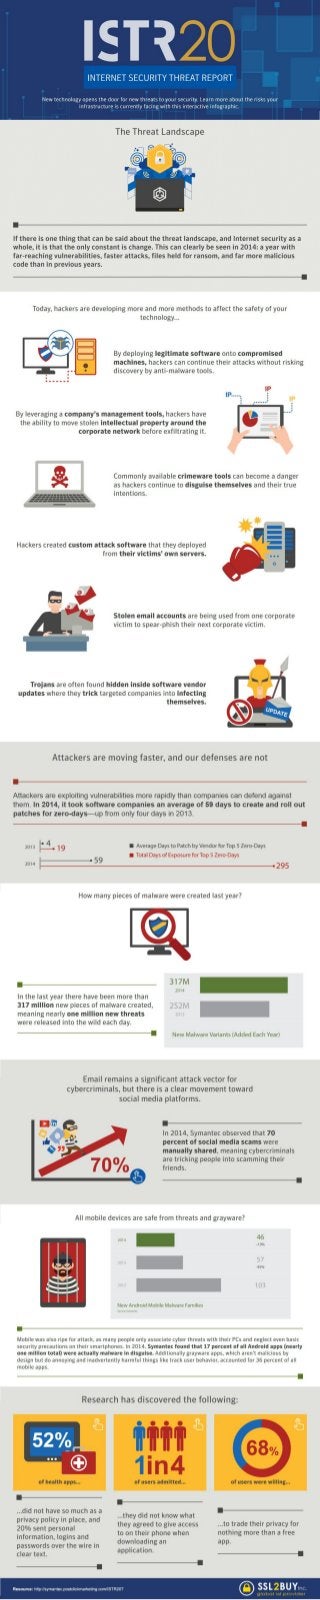 Attackers are getting Smarter than Defenders - Internet Security